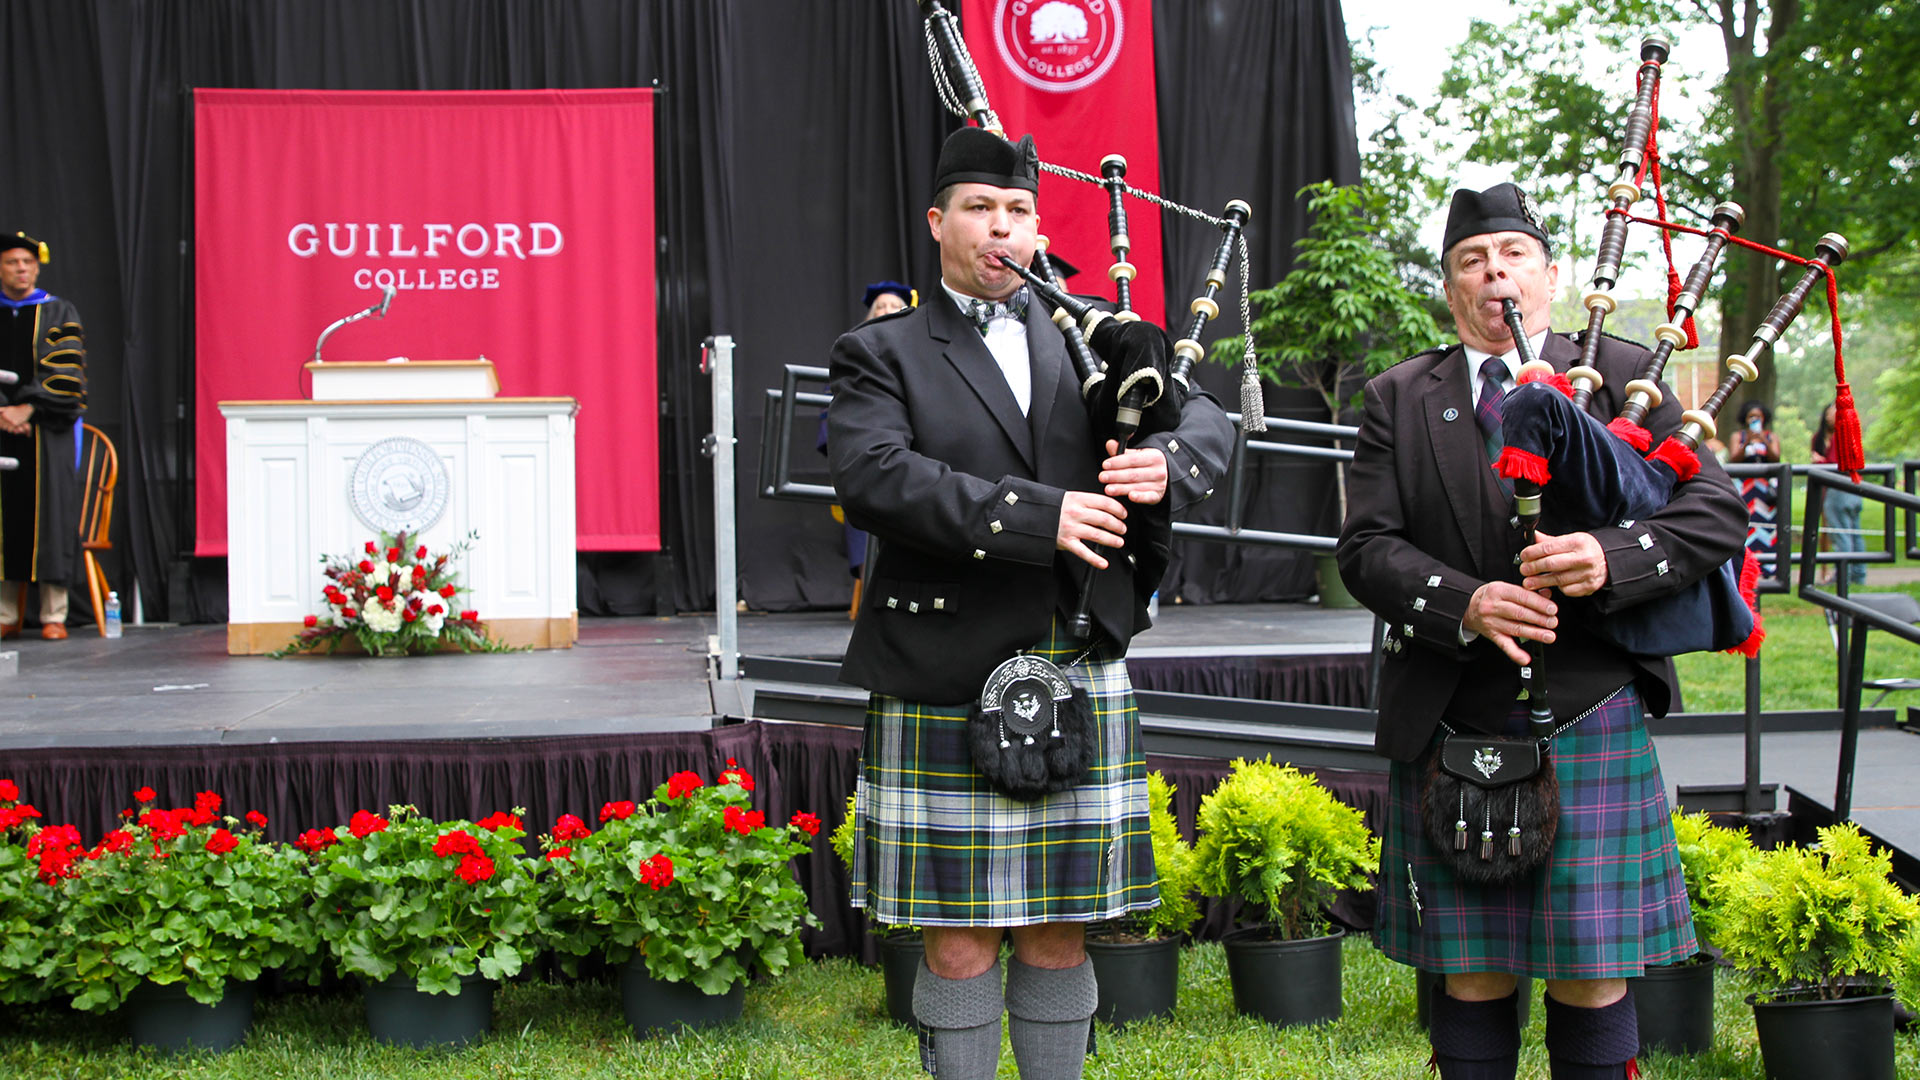 Bagpipers play in the graduates